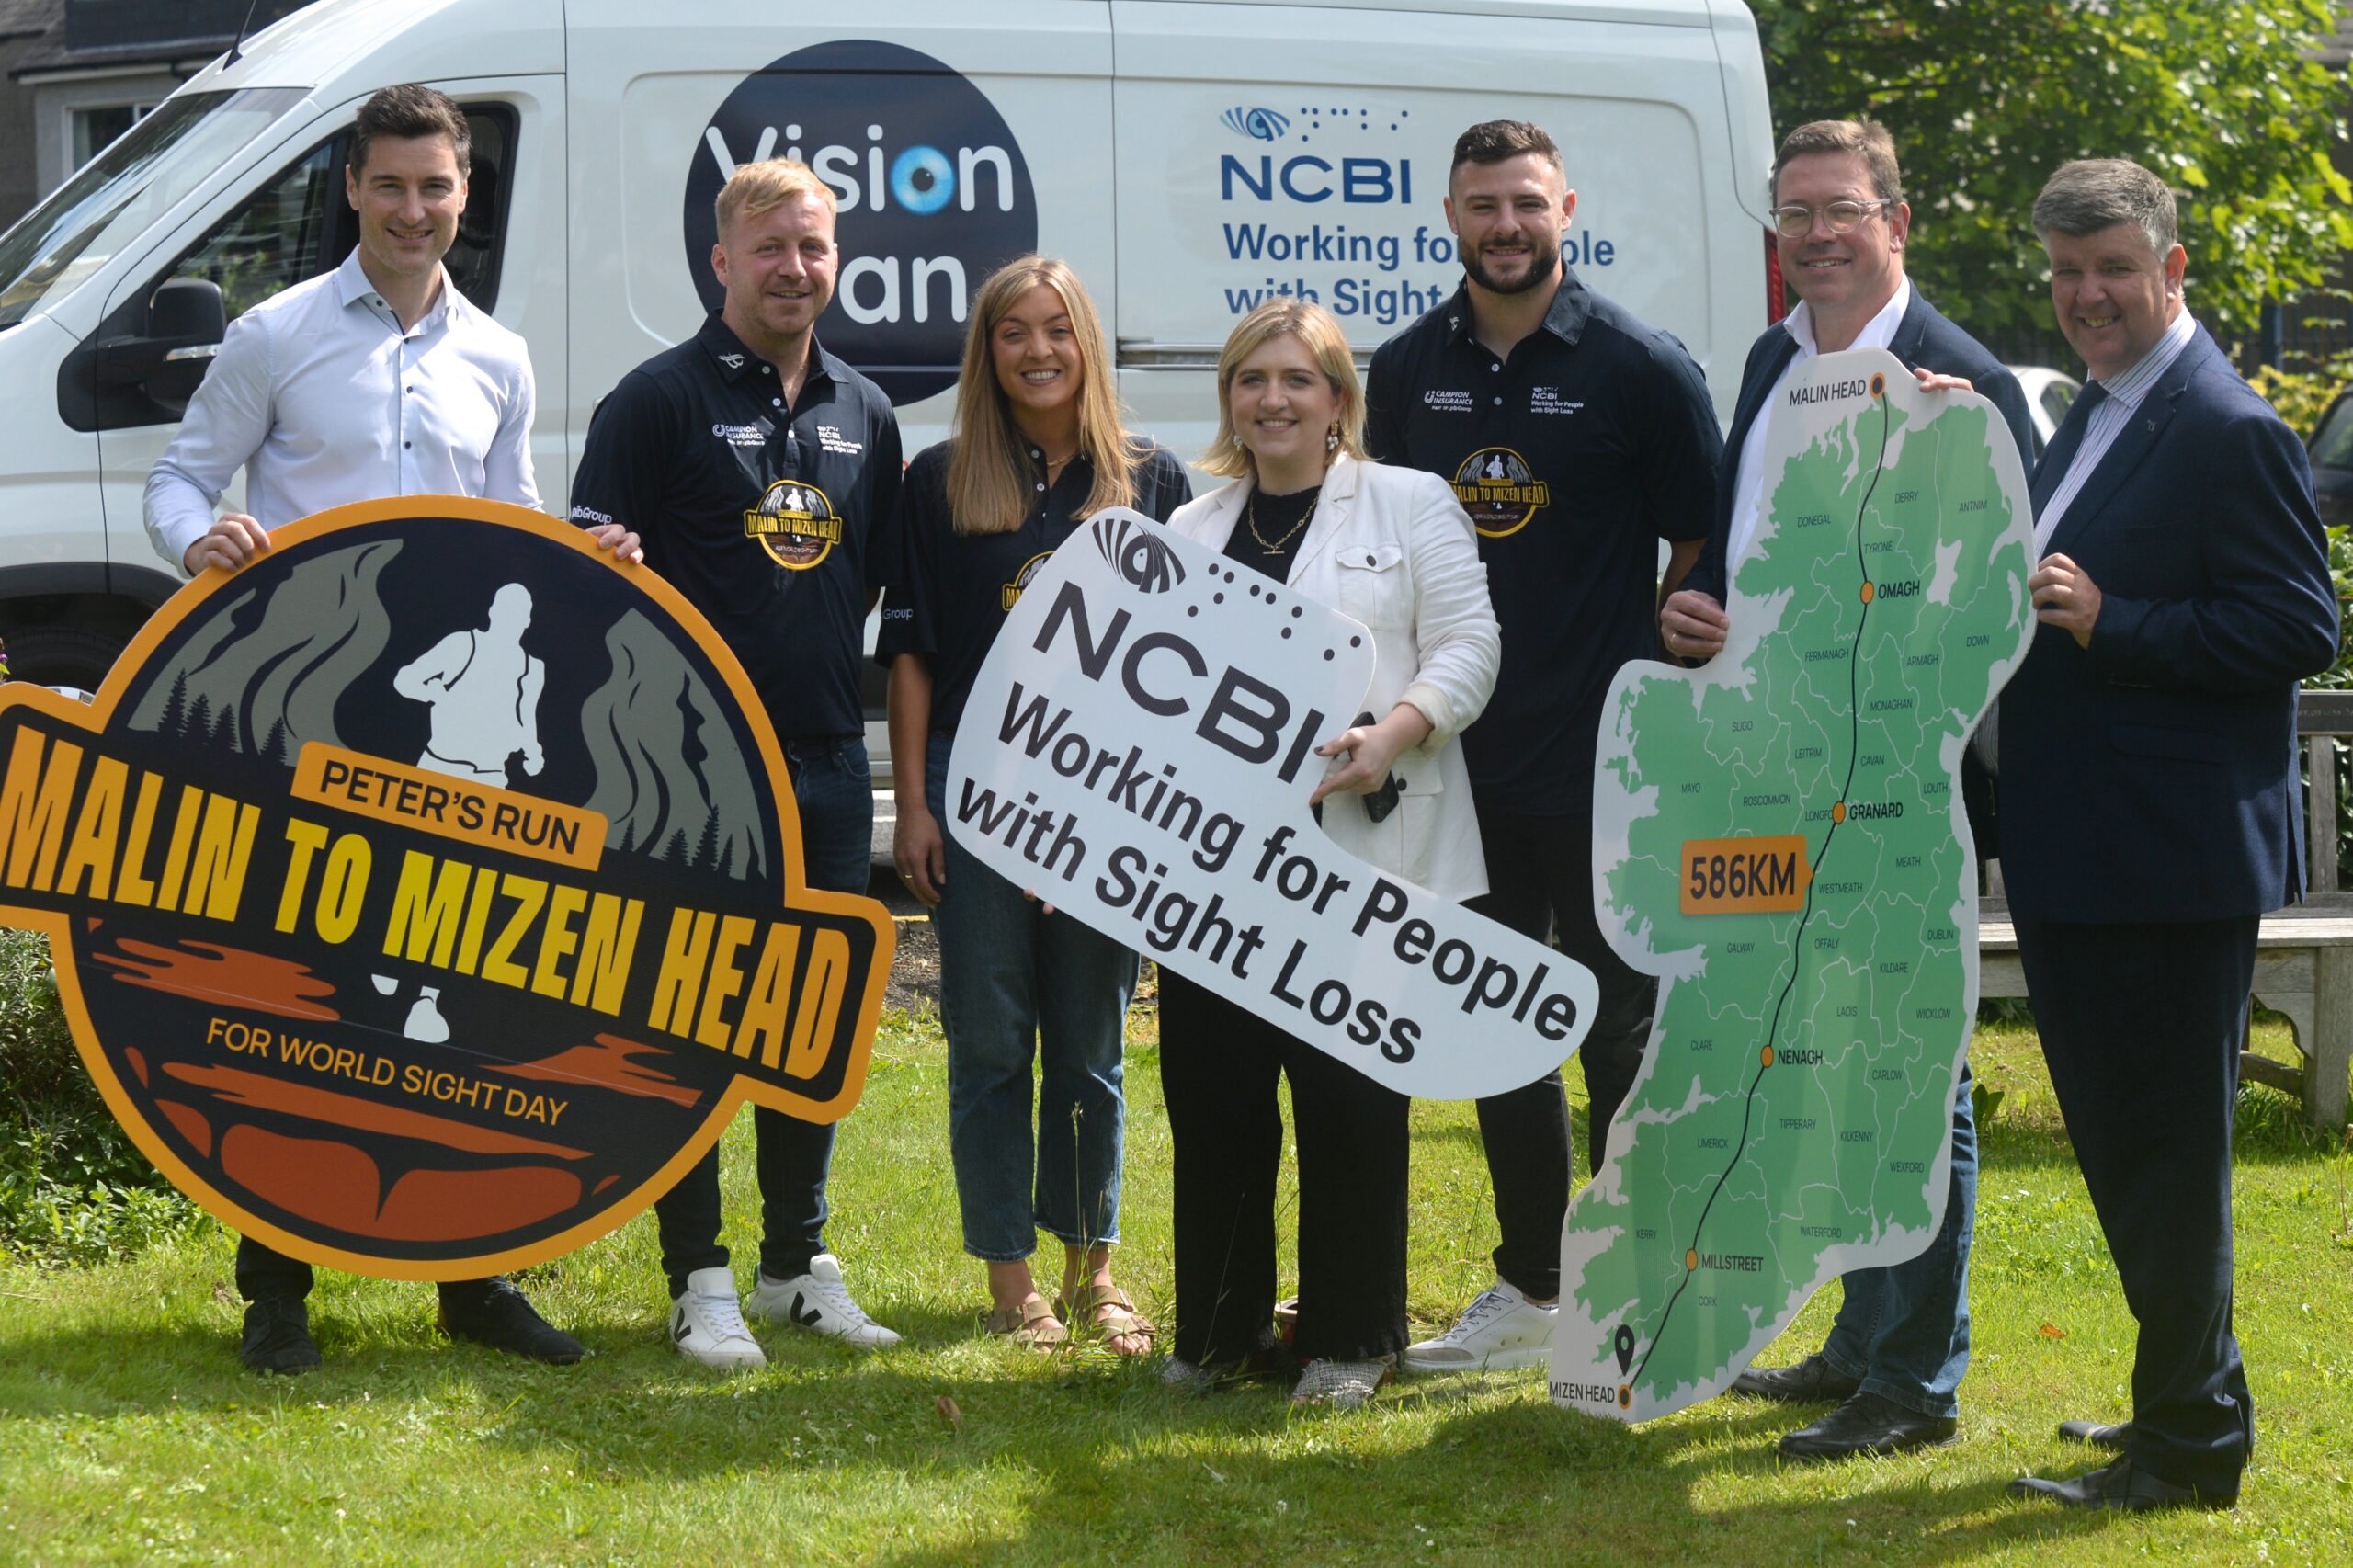 Aaron Mullaniff (NCBI), Peter Ryan, Gemma OGorman, Katie O'Dea (NCBI), Robbie Henshaw, Rob Tyrrell (Campion Insurance) and Kevin Whelan (NCBI) are all standing on a patch of grass holding signs for Peter's Run, NCBI and a large map of Ireland which shows the route of the run. They are standing in front of a white van which is branded as the Vision Van by NCBI.